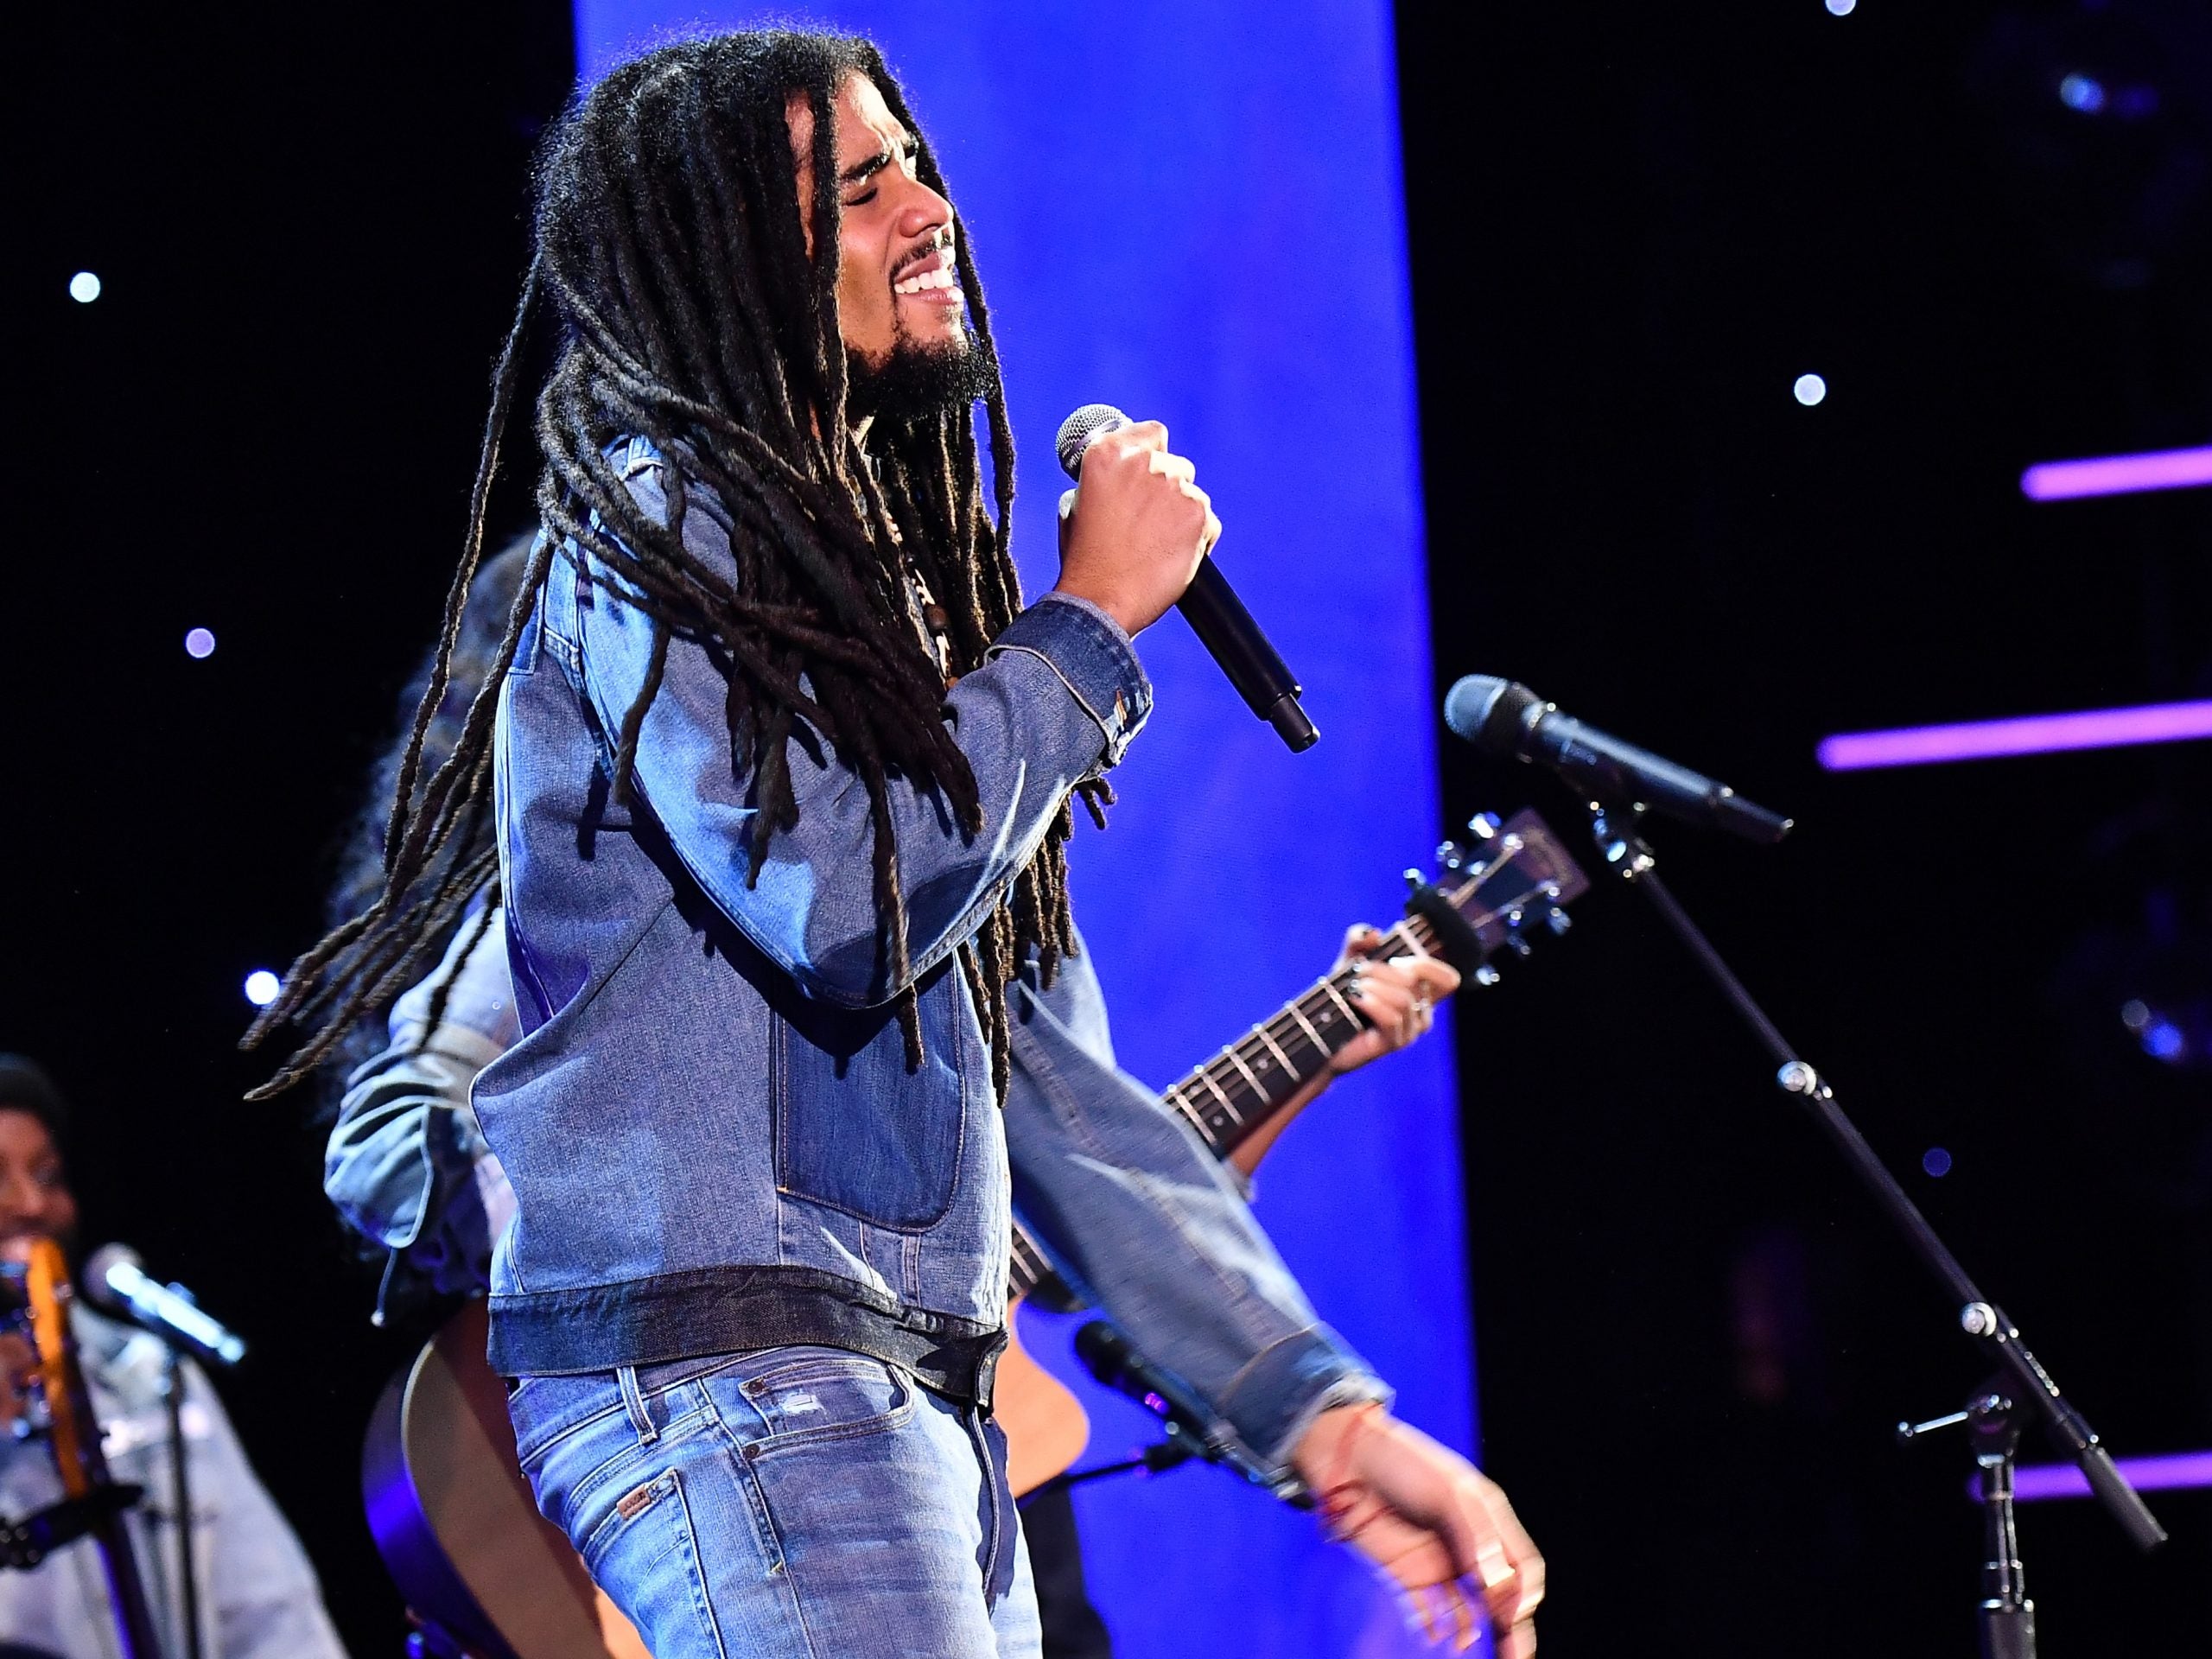 Skip Marley Adds Wale for "Slow Down" Remix with H.E.R.